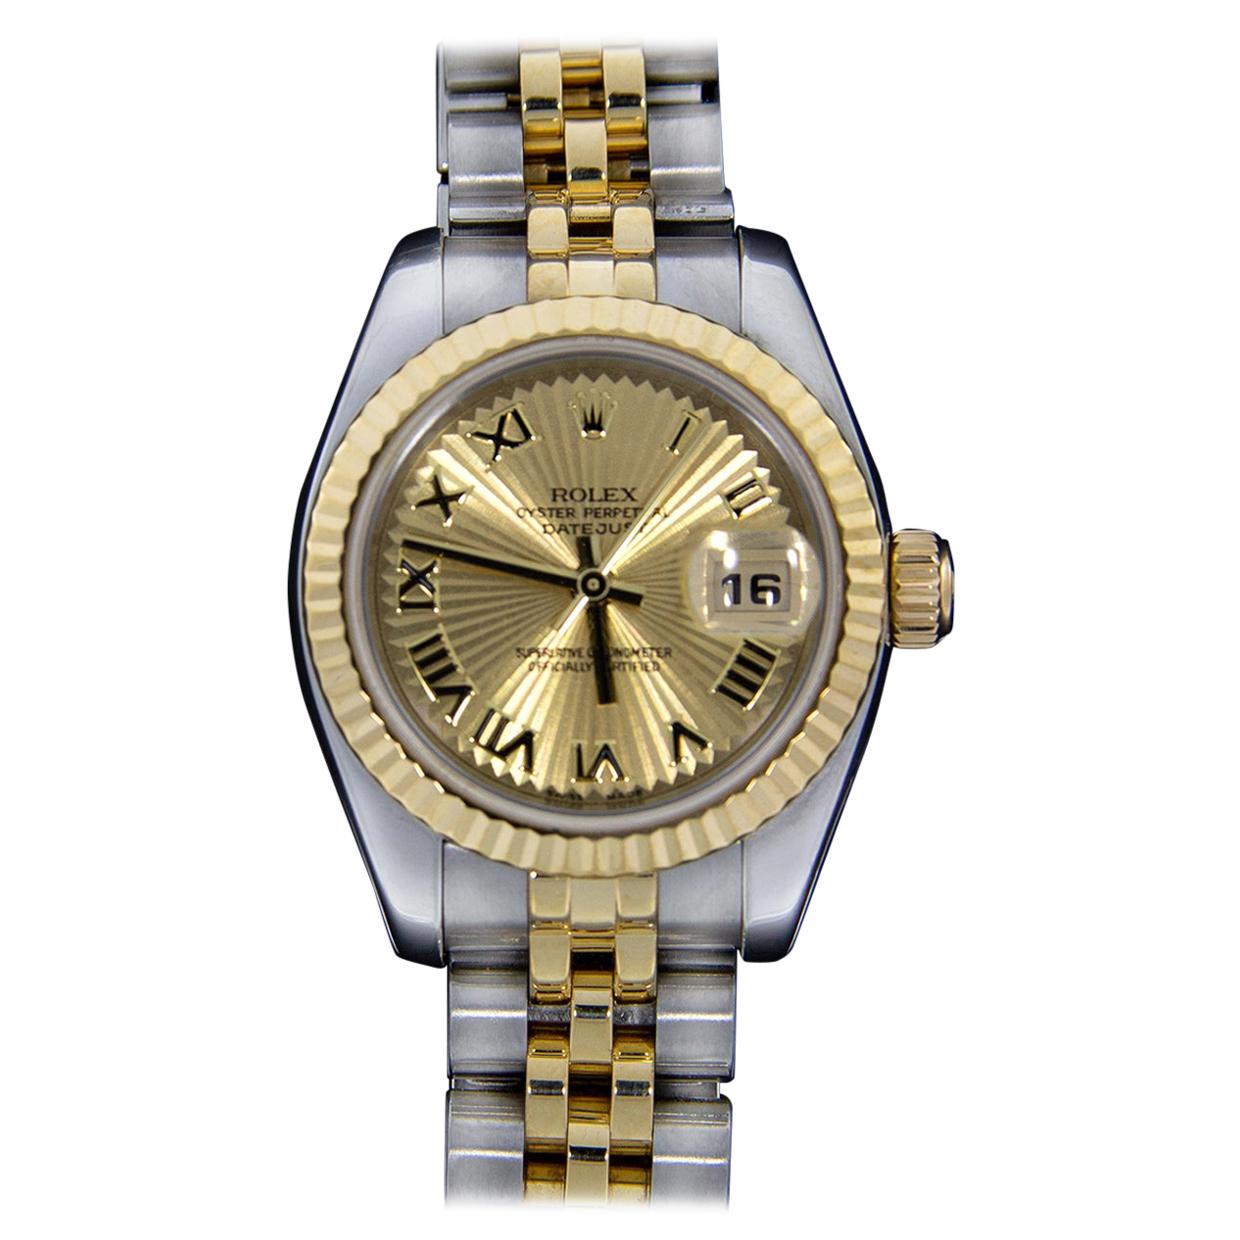 Rolex Two-Tone Datejust Watch Sunbeam Dial with Box and Paper